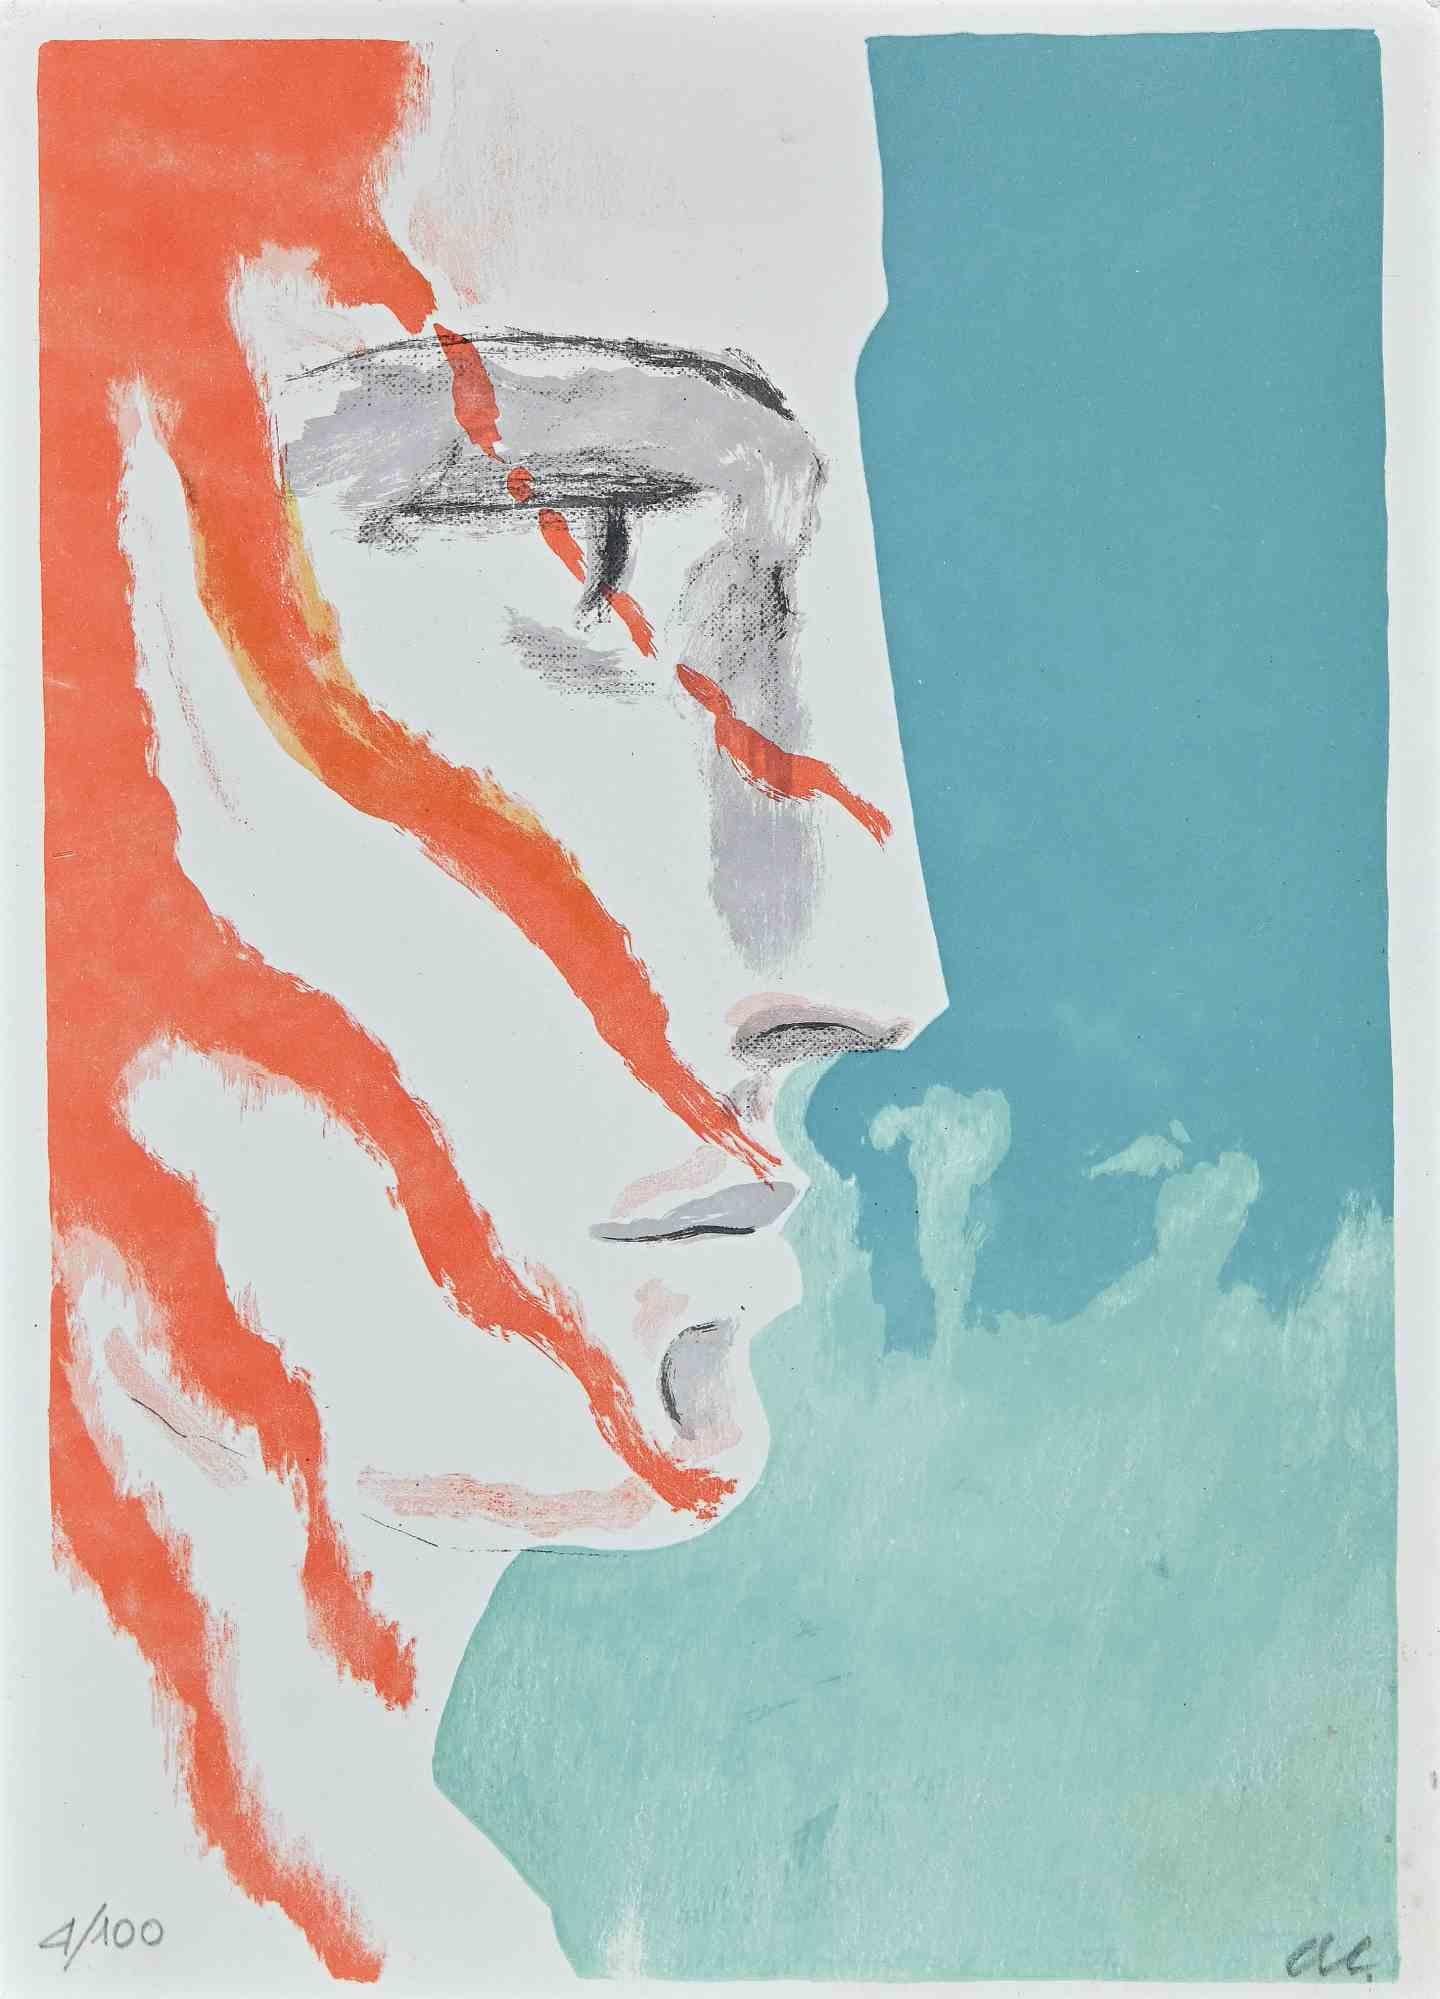 Red Hair Profile is a lithograph print realized by Arturo Carmassi in 1973.

Lithograph on paper. Hand-signed and numbered on the lower in pencil, edition of 100 prints.

With the label of authenticity on the rear La Nuovo Foglio" with date and